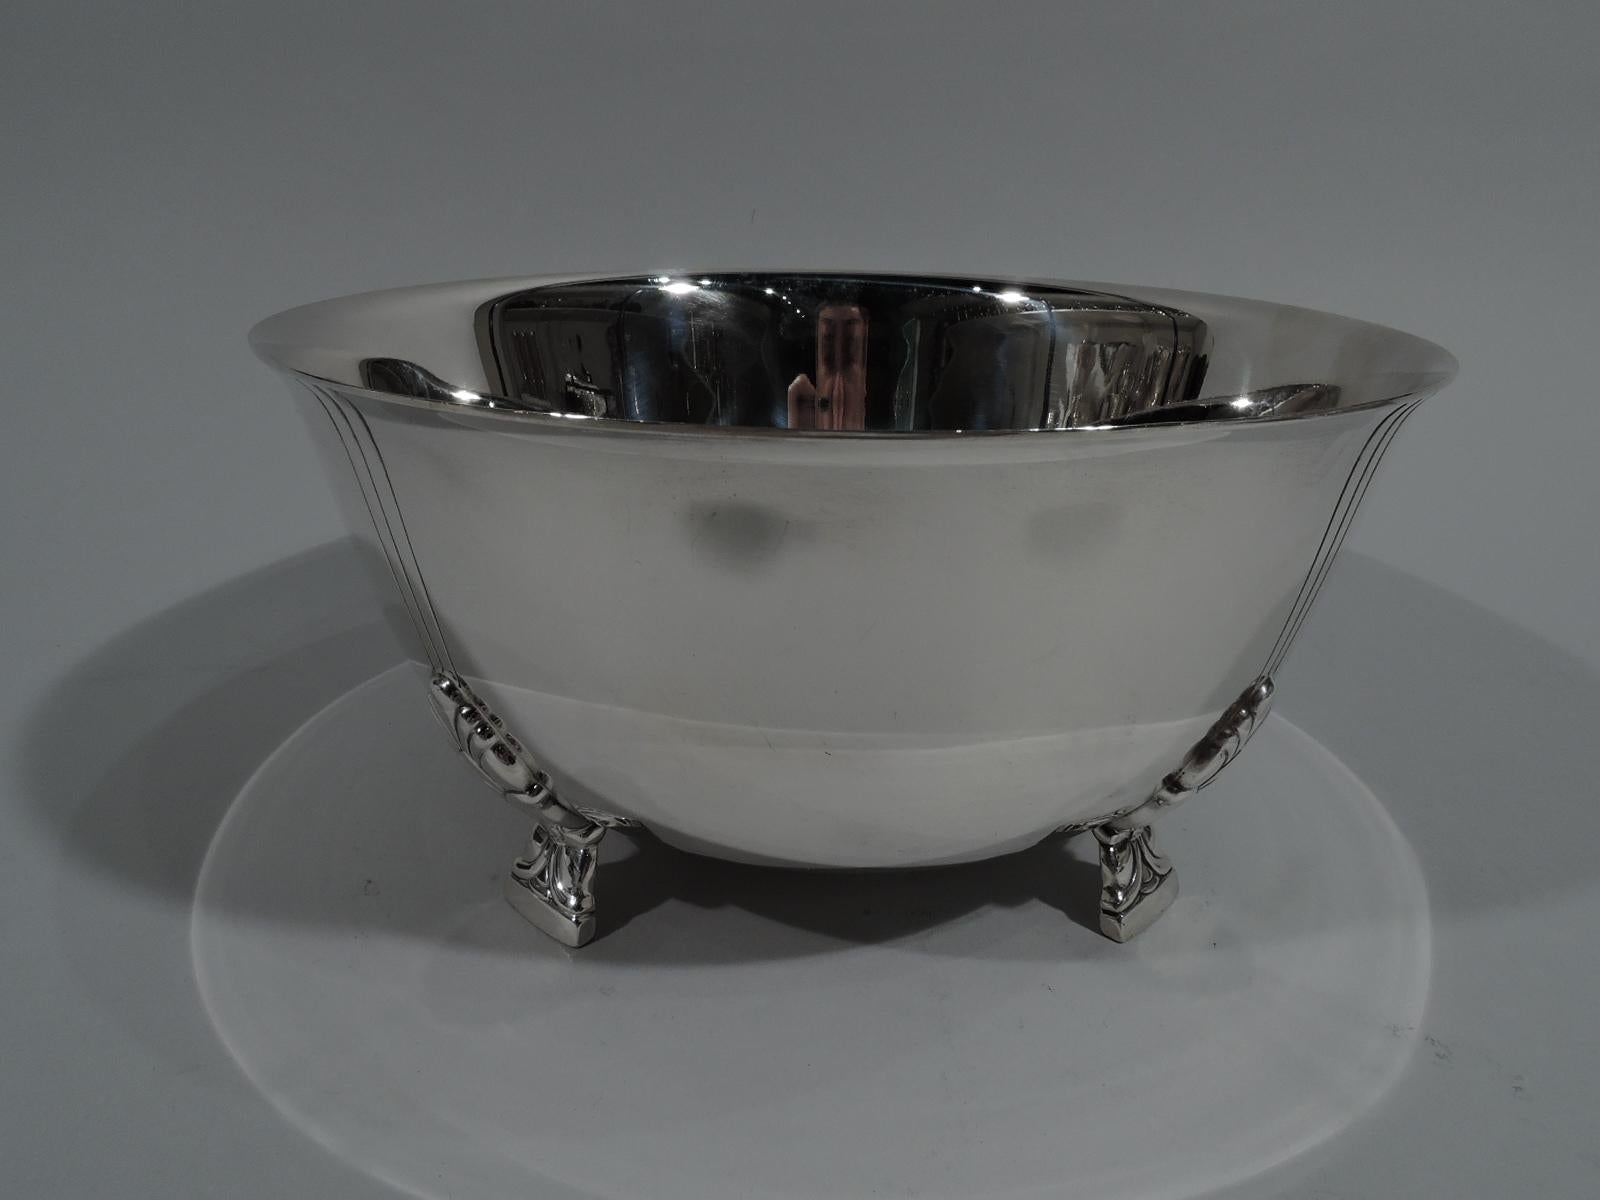 Classic sterling silver bowl in Palmette pattern. Made by Tiffany & Co. in New York. Curved sides and flared rim. Rests on 4 side-mounted stylized floral supports. Each support radiates 3 incised vertical lines. An early piece in this pattern, which